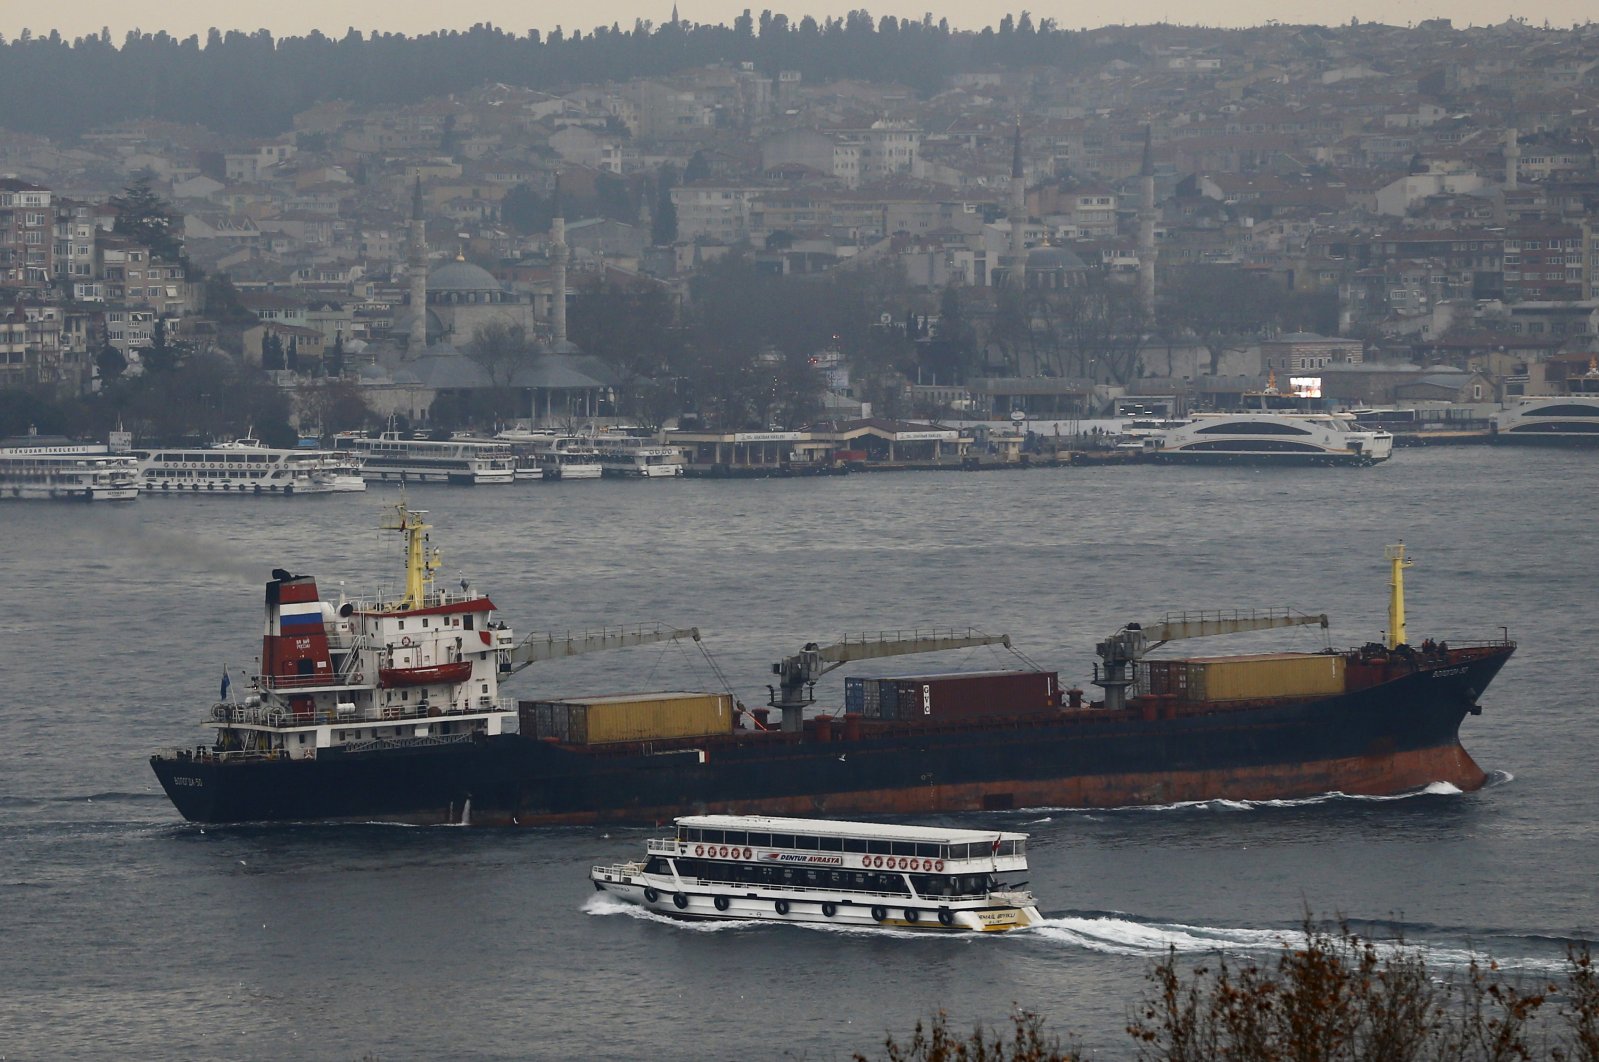 The Russian Navy cargo ship Vologda-50 sets sail in the Bosporus, on its way to the Mediterranean Sea, in Istanbul, Turkey, Dec. 26, 2015. (Reuters File Photo)